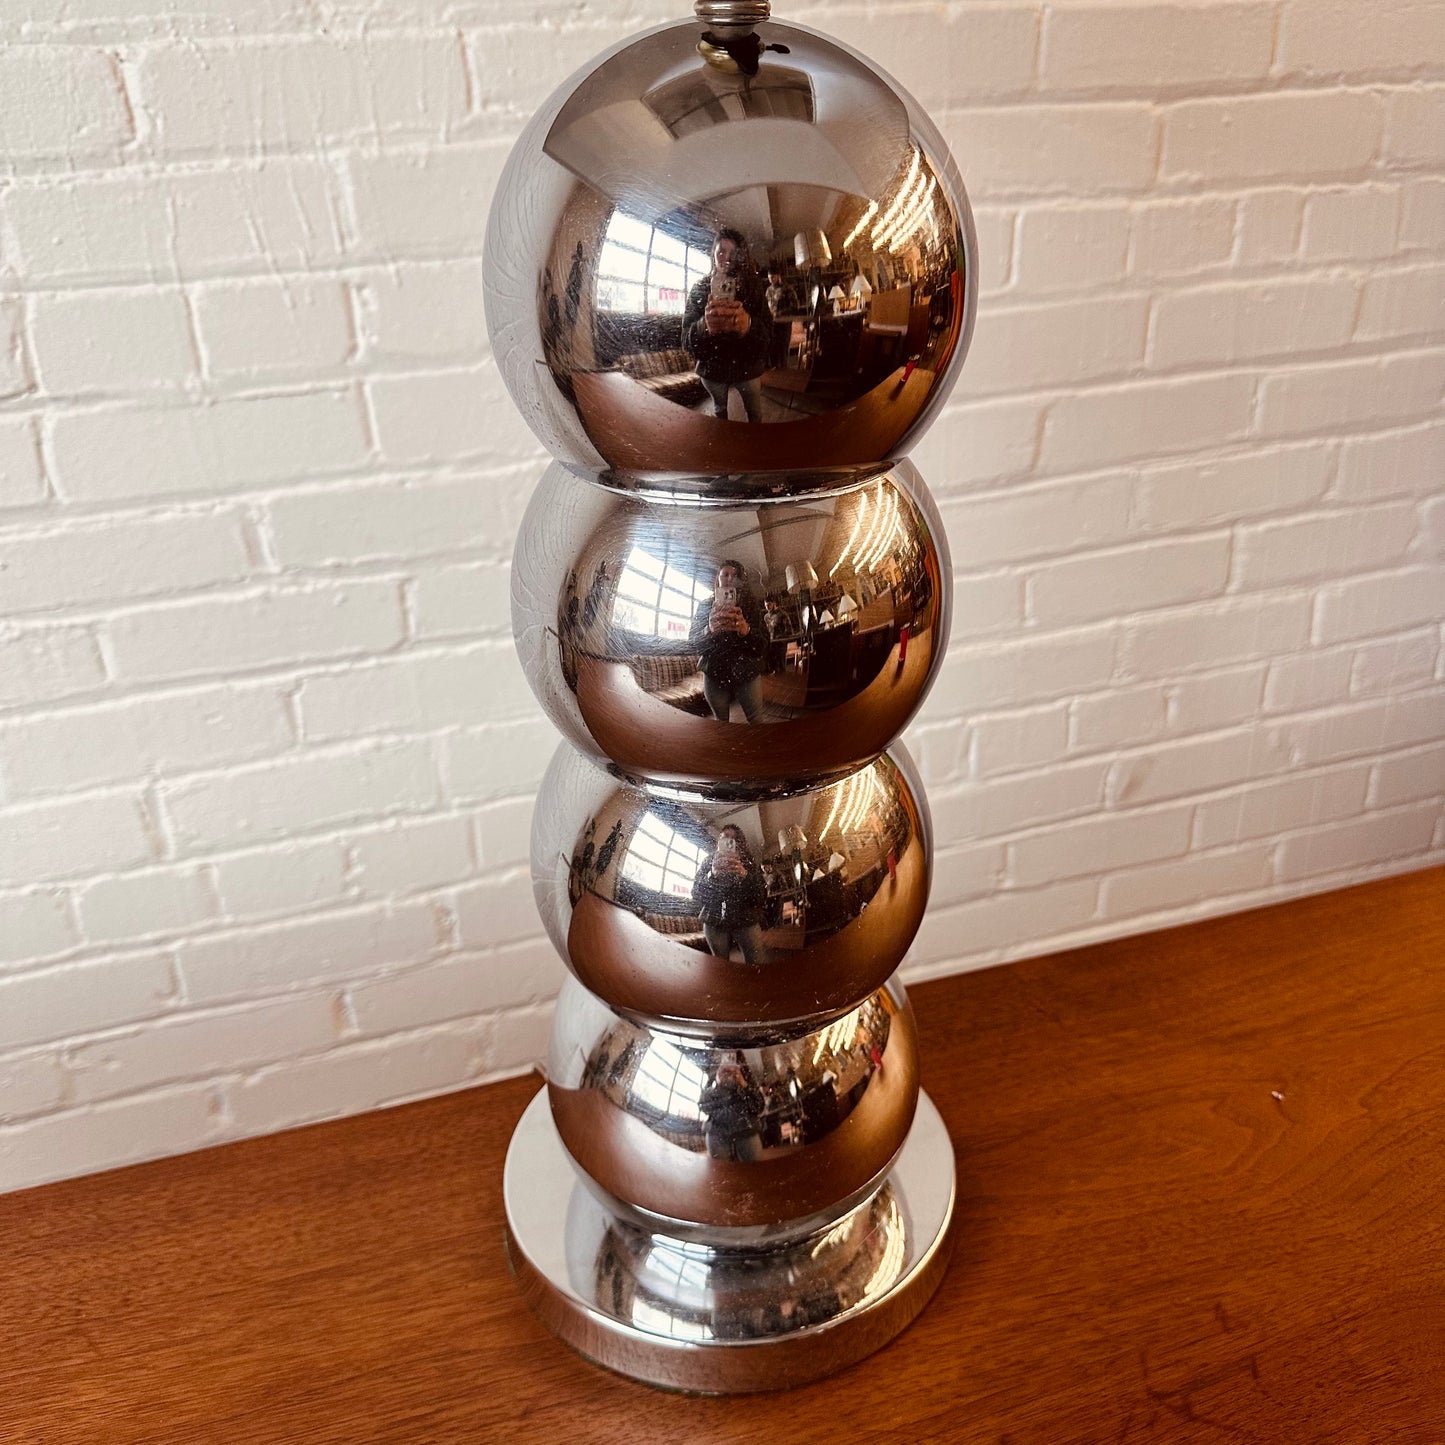 CHROME BALL LAMP IN GEORGE KOVACS STYLE